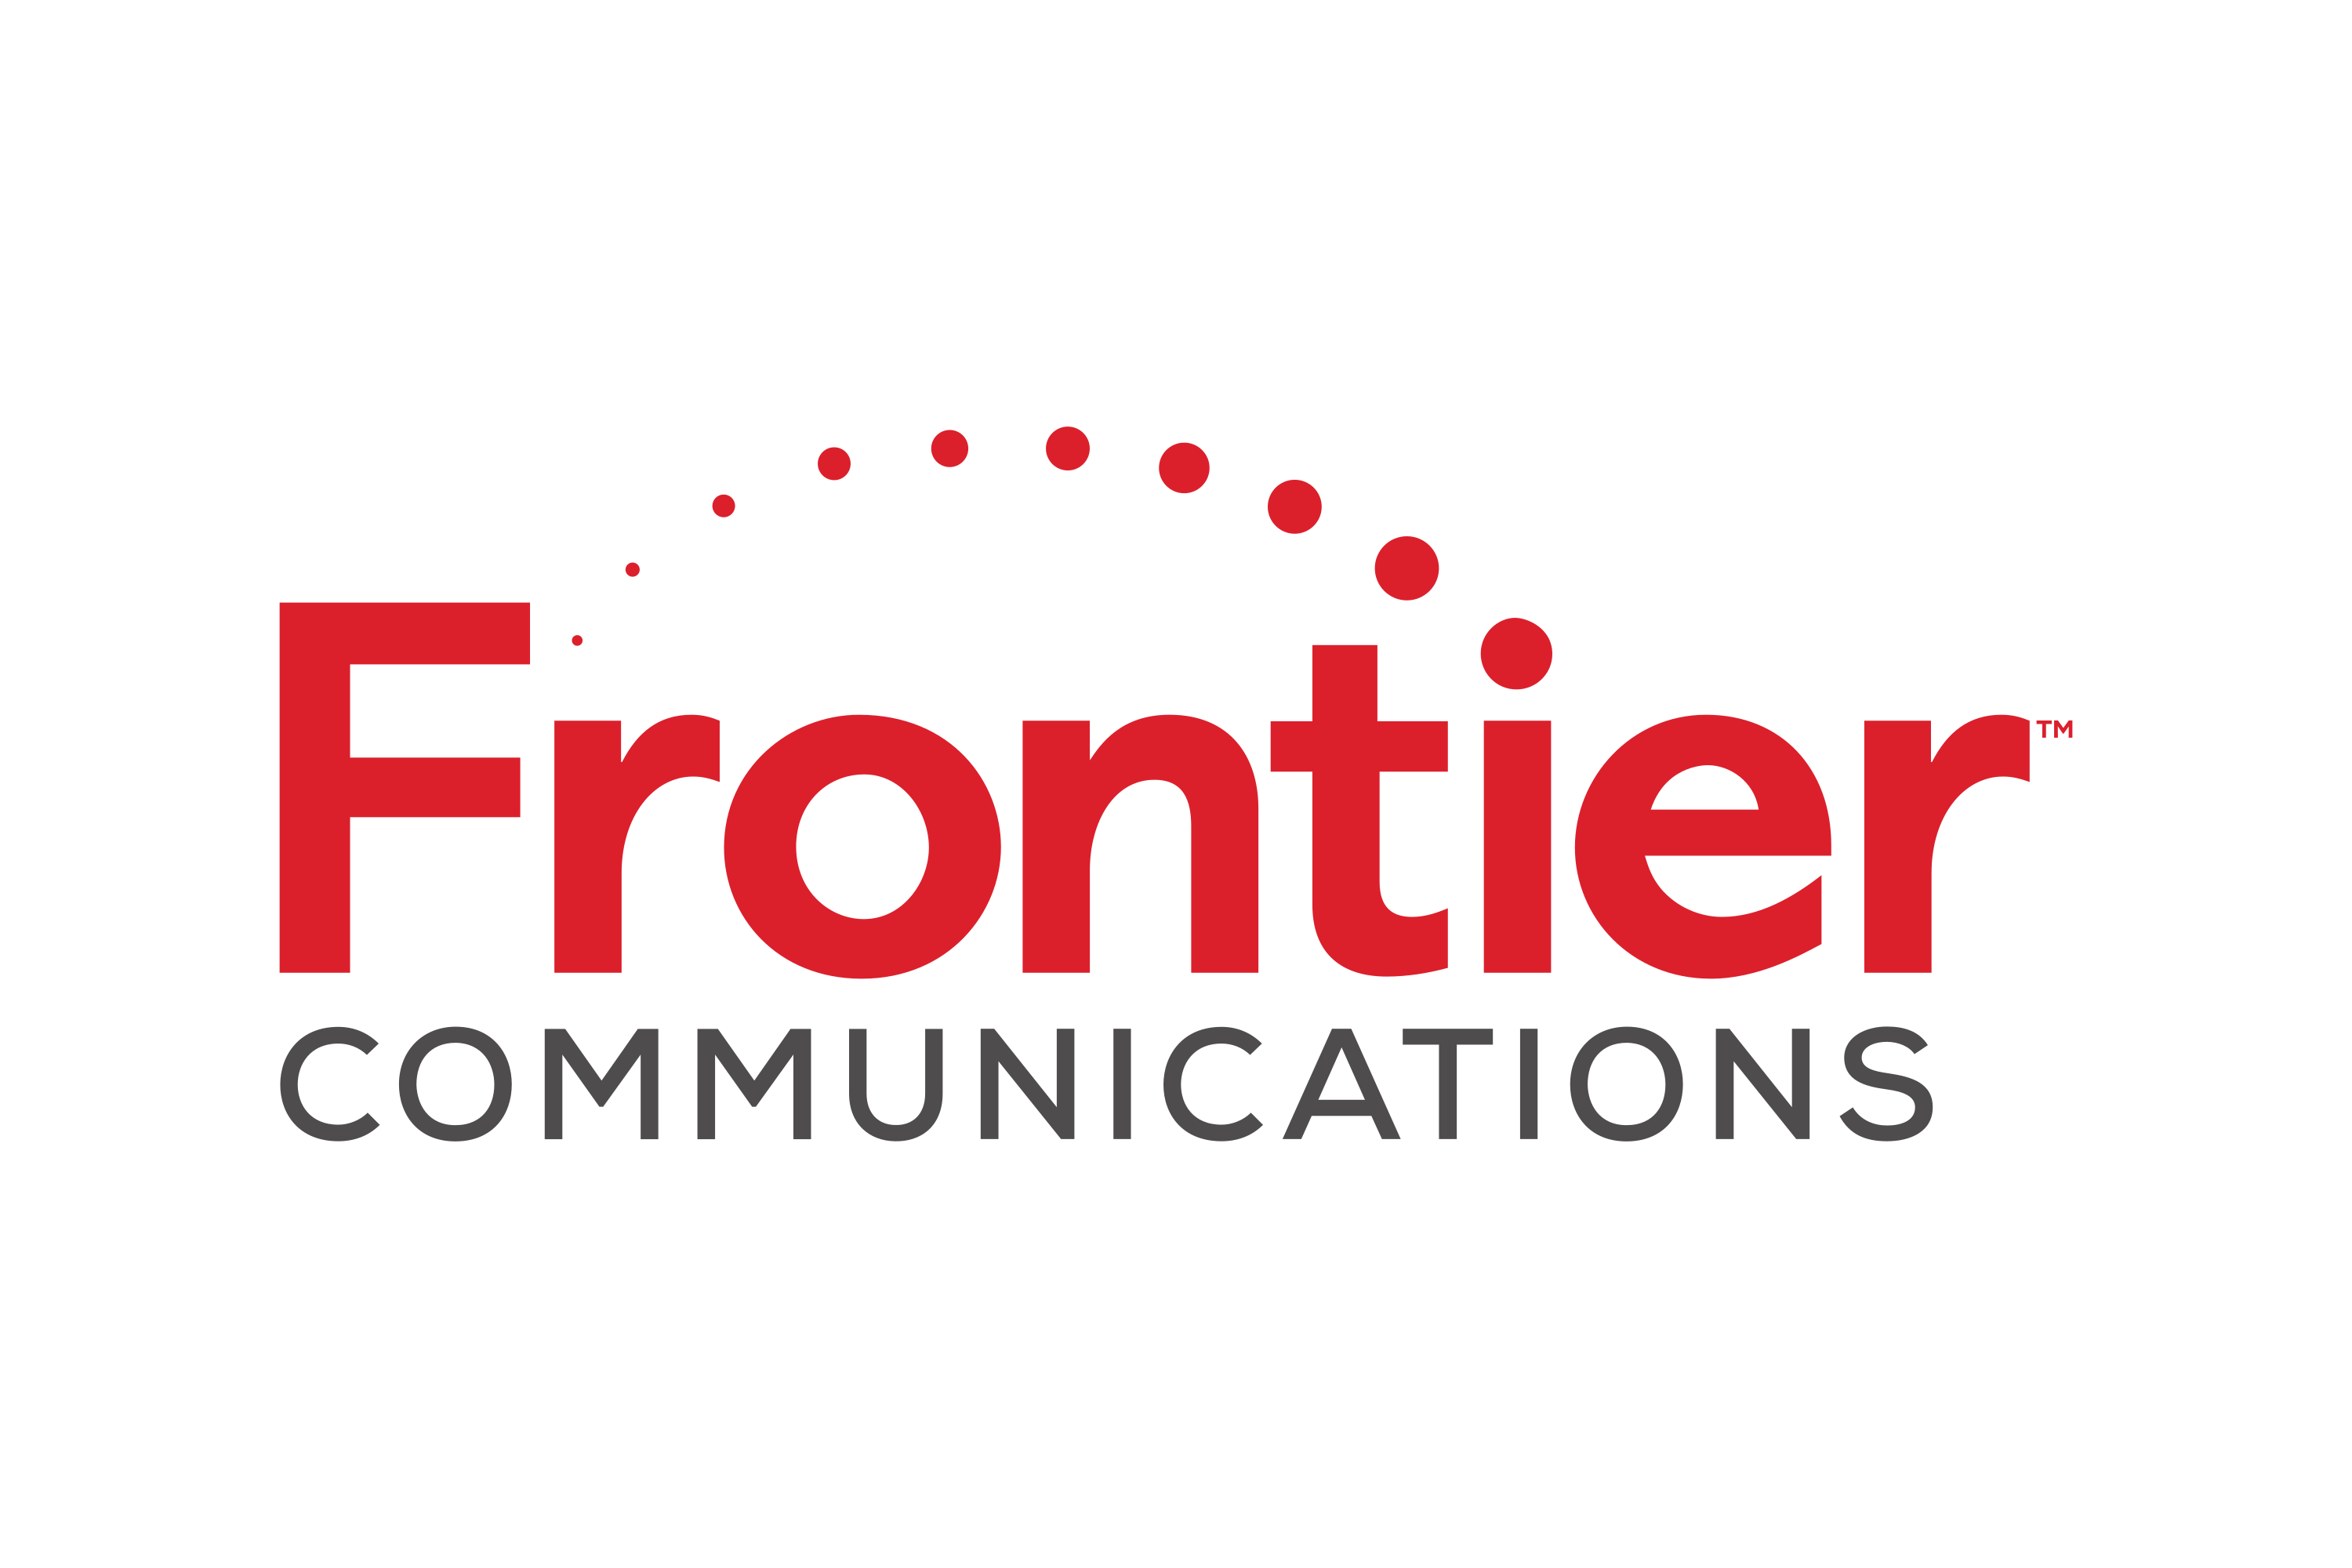 Download Frontier Communications Logo in SVG Vector or PNG File Format